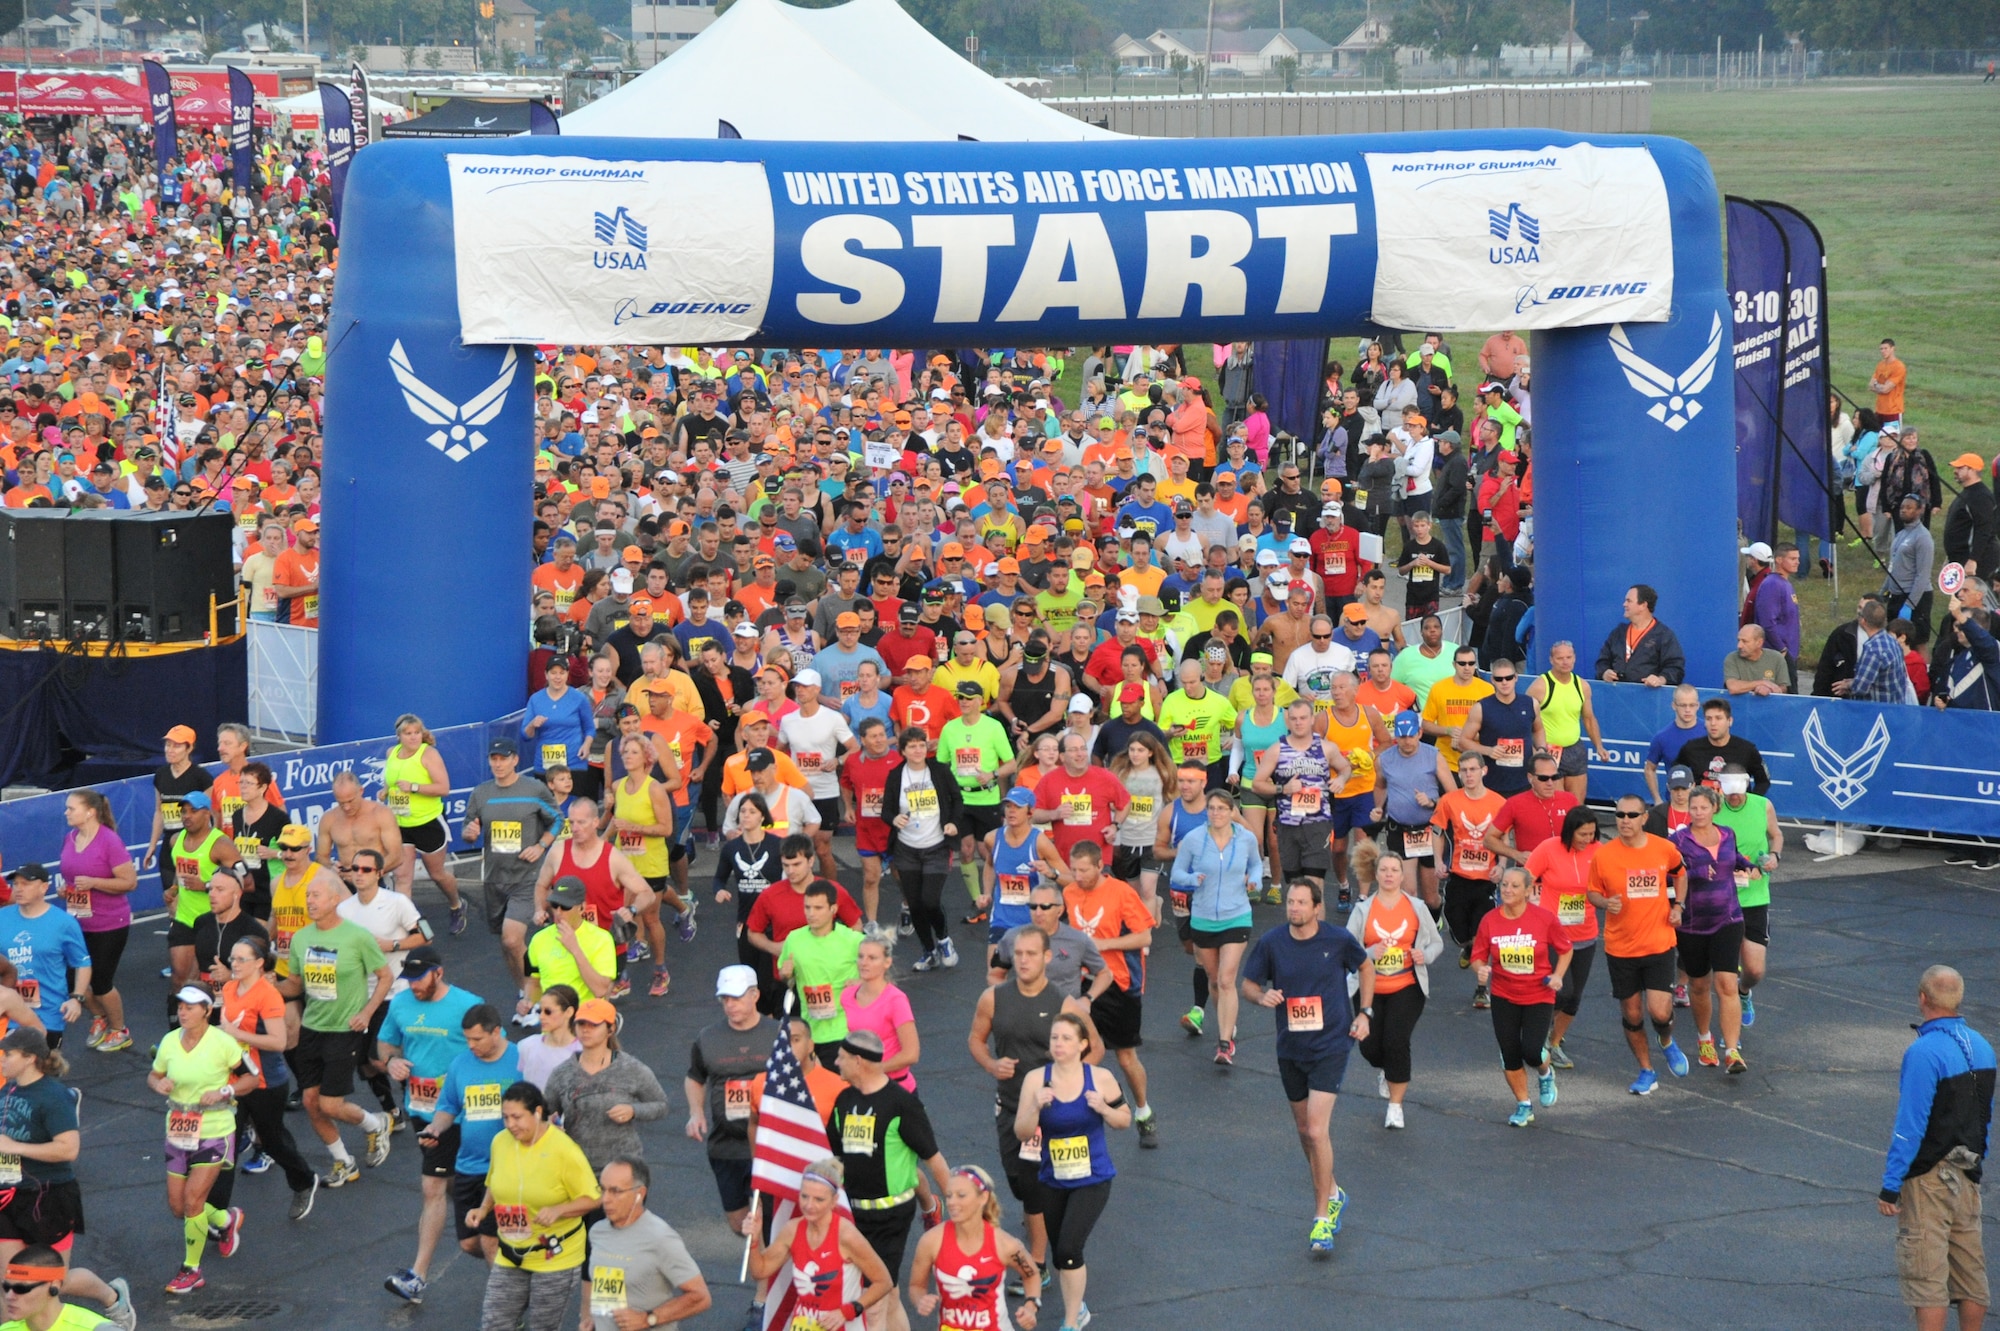 Runners take off from the starting line of the 2104 U.S. Air Force Marathon Sept. 20, 2014, at Wright-Patterson Air Force Base, Ohio. The race set an attendance record with approximately 15,000 runners. (U.S. Air Force photo/Mike Libecap)